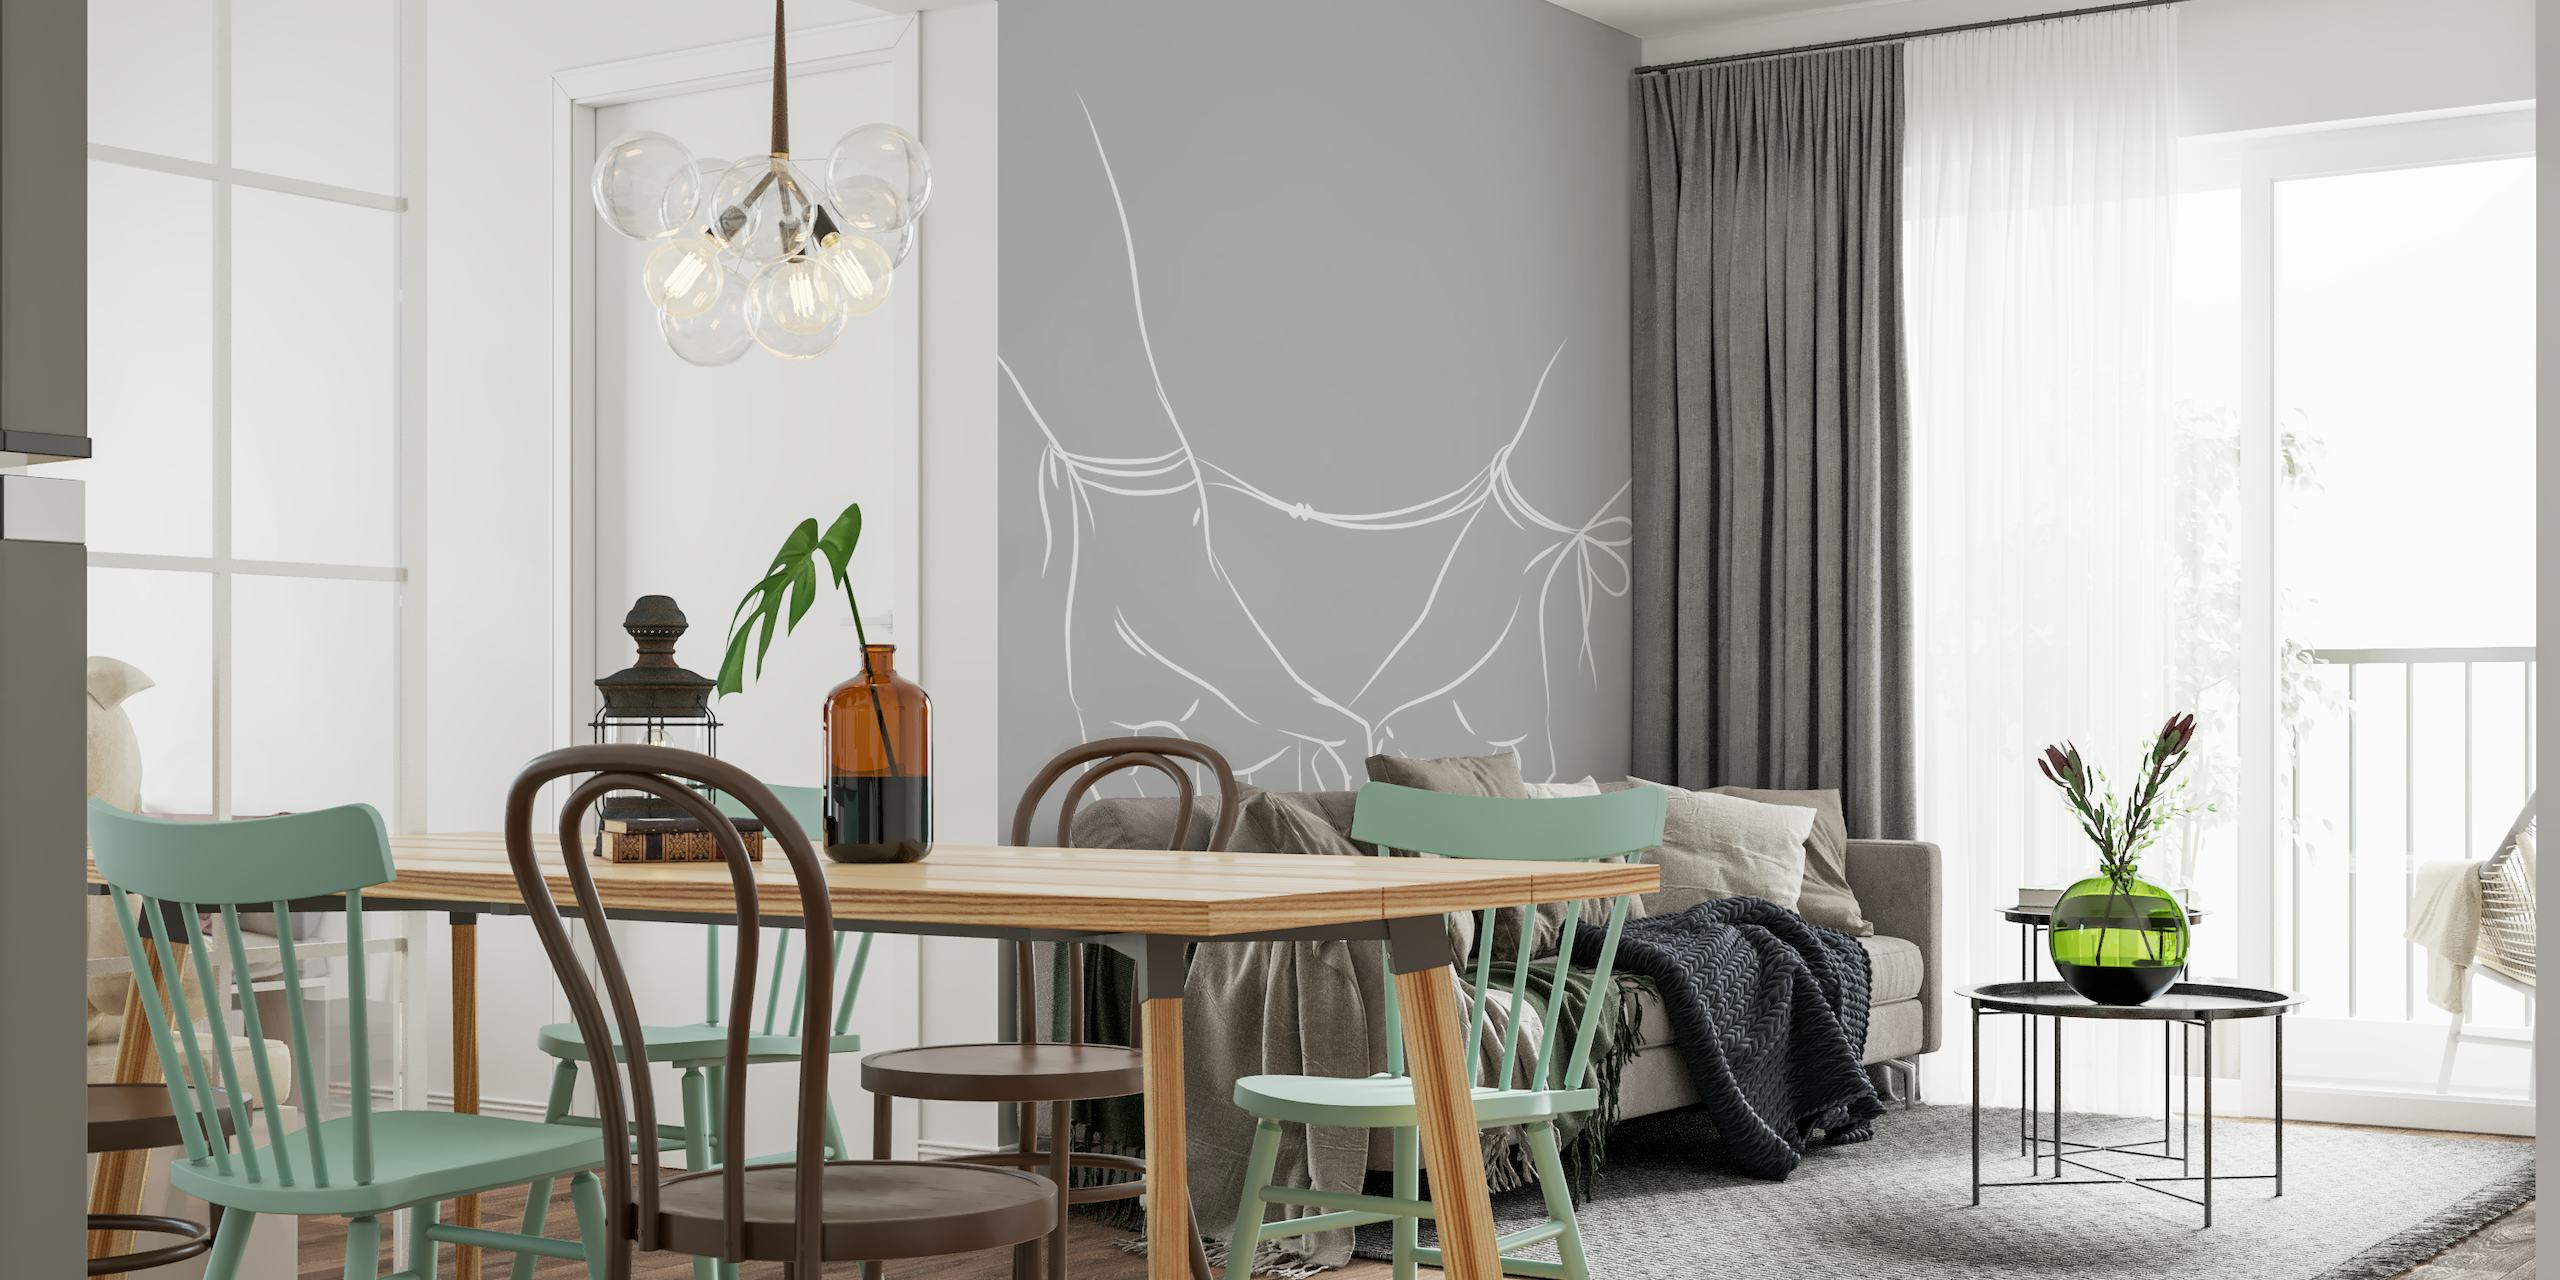 Minimalist line drawing wall mural of interlinked hands representing friendship on a solid background